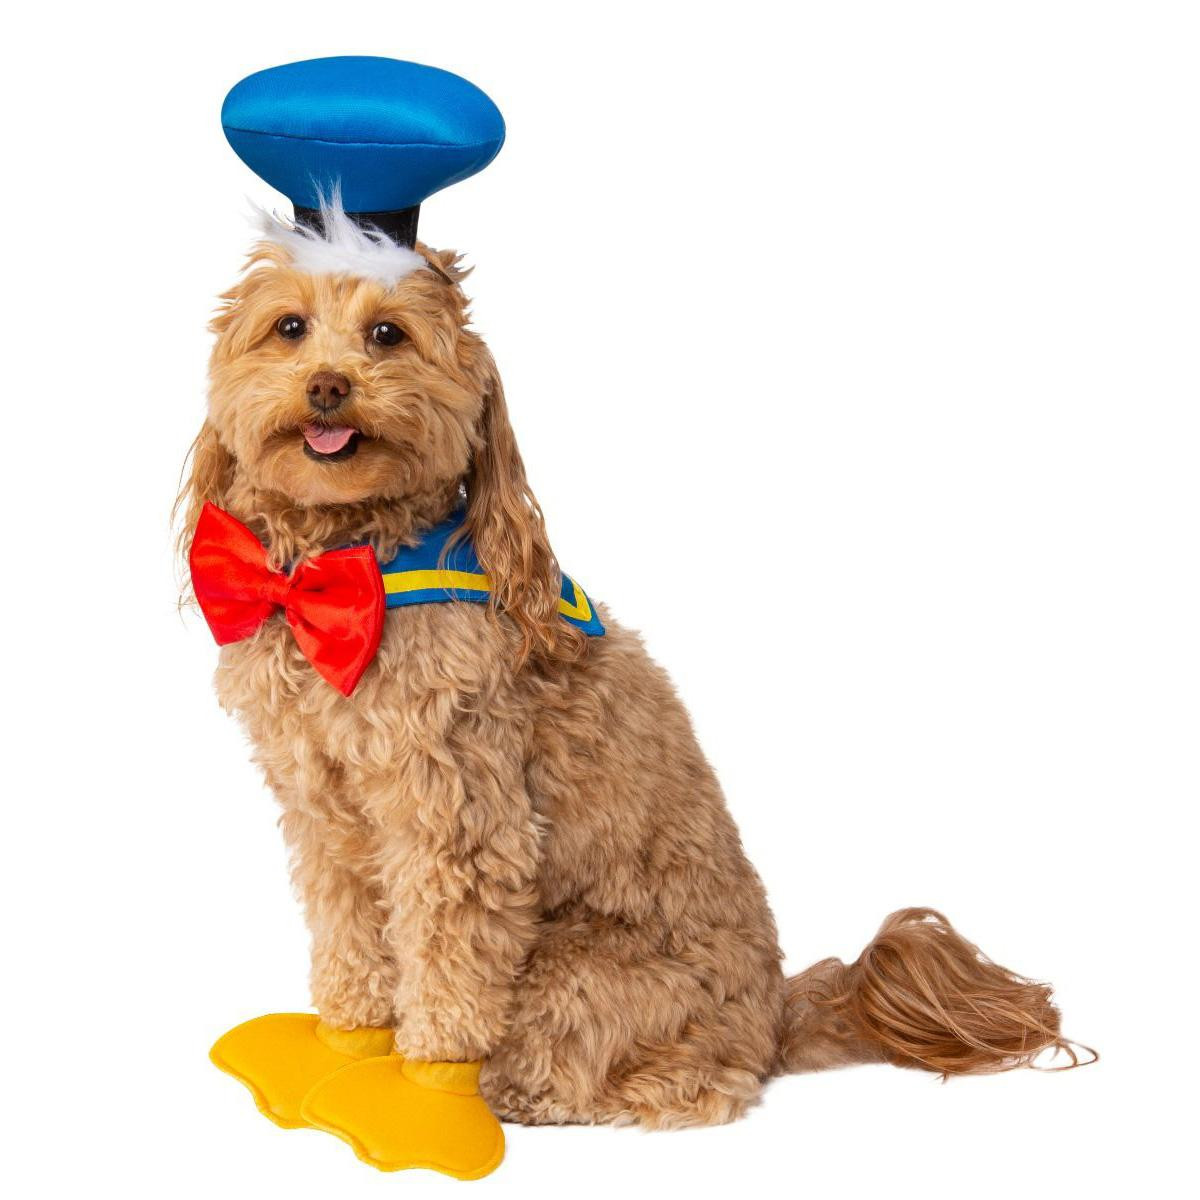 DIY Donald Duck Costume
 Disney Donald Duck Dog Costume Accessories by